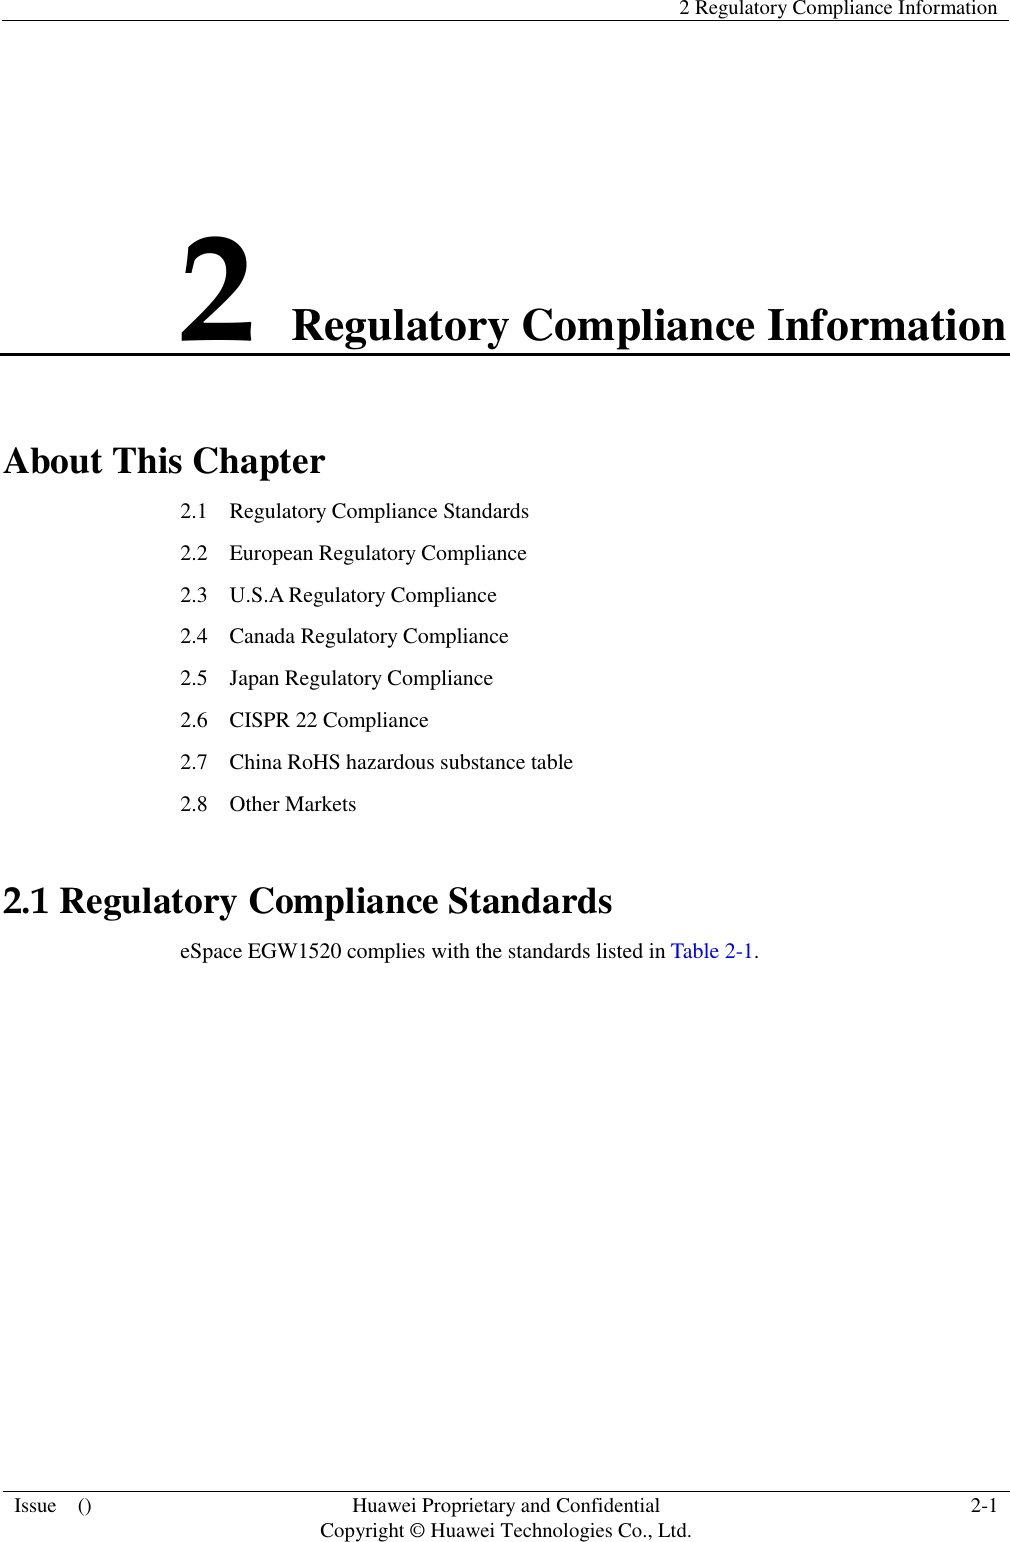   2 Regulatory Compliance Information  Issue    () Huawei Proprietary and Confidential                                     Copyright © Huawei Technologies Co., Ltd. 2-1  2 Regulatory Compliance Information About This Chapter 2.1    Regulatory Compliance Standards 2.2    European Regulatory Compliance 2.3    U.S.A Regulatory Compliance 2.4    Canada Regulatory Compliance 2.5  Japan Regulatory Compliance 2.6  CISPR 22 Compliance 2.7    China RoHS hazardous substance table 2.8    Other Markets 2.1 Regulatory Compliance Standards eSpace EGW1520 complies with the standards listed in Table 2-1. 